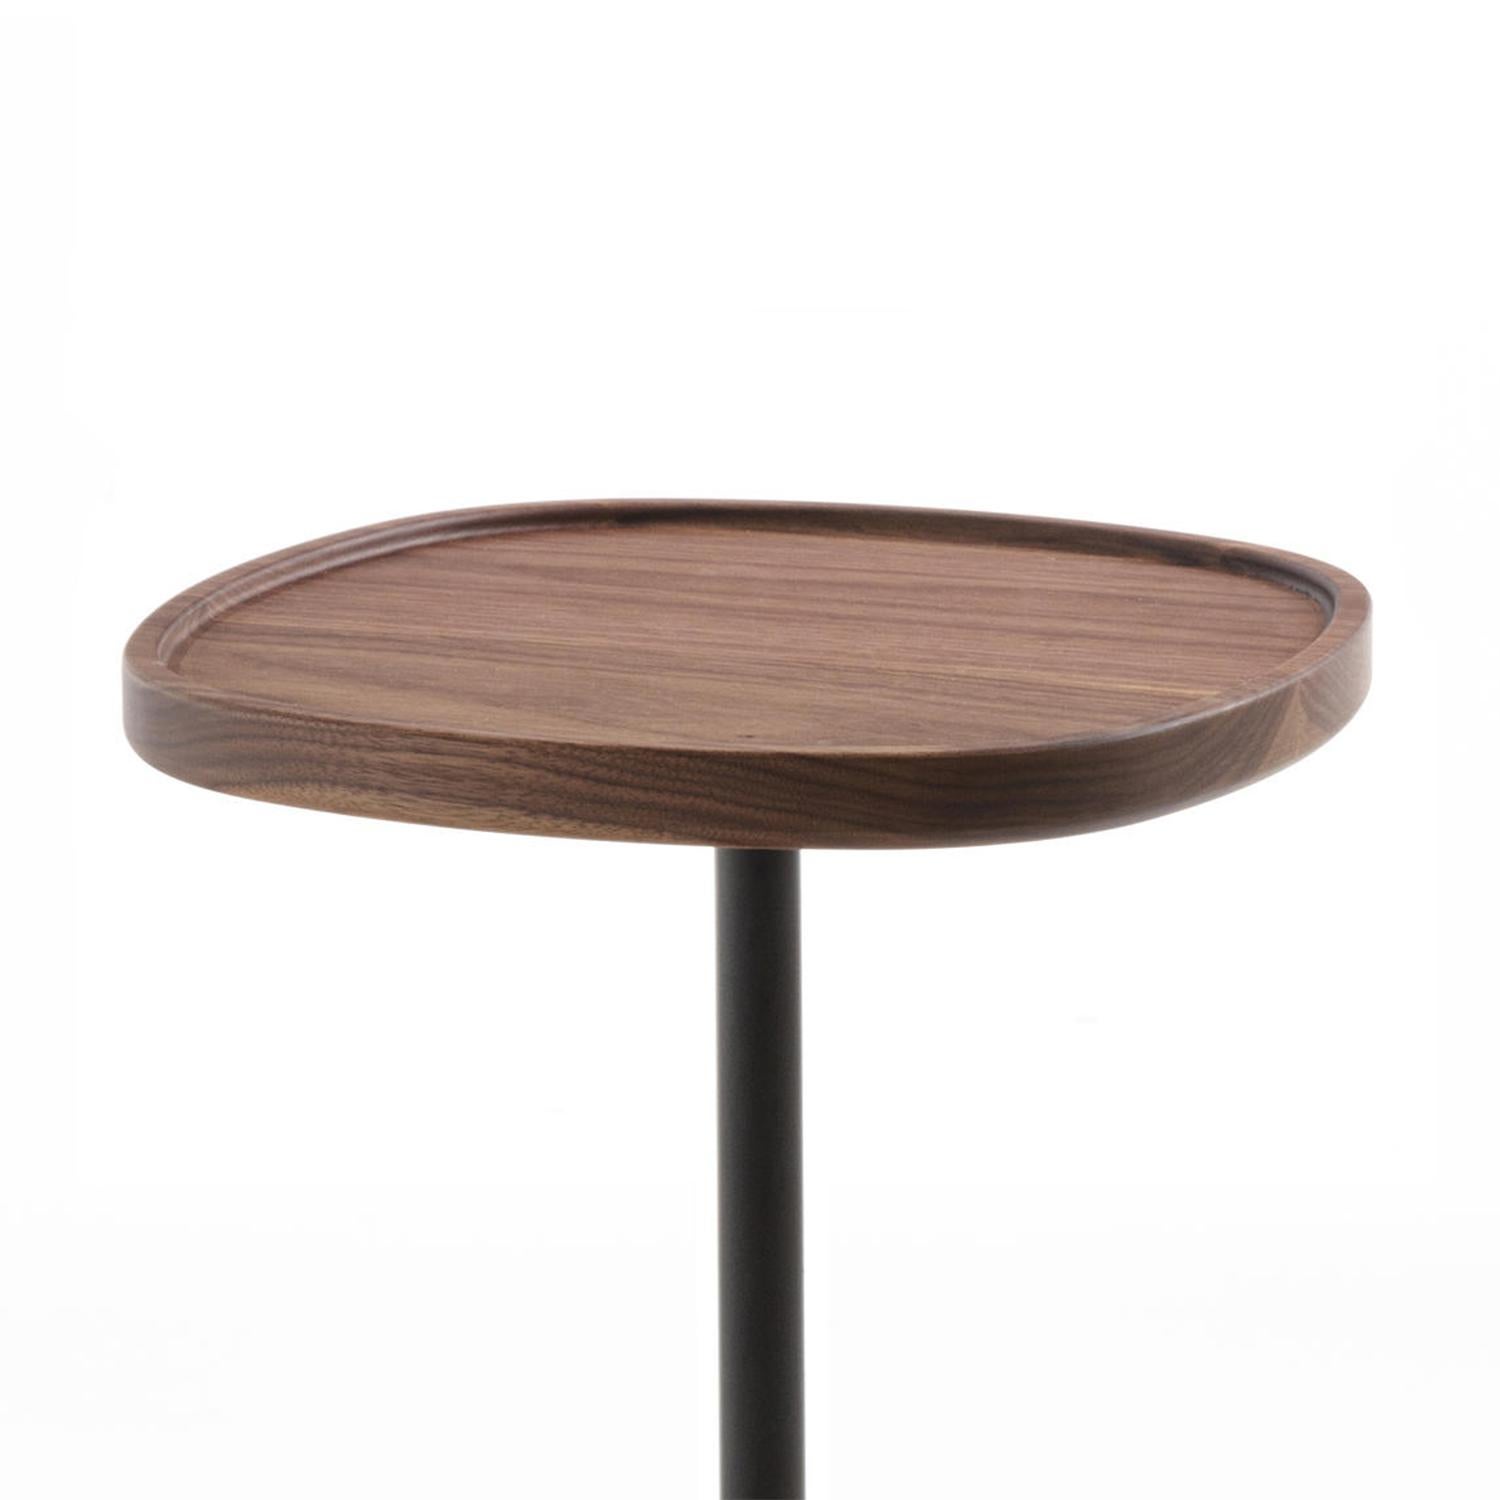 Side table Stelle square with Carnico dark
grey marble base with black matte metal rod.
Base is 14cm diameter. With square solid walnut
rounded corners top.
Also available with white Carrara marble base.
Also available in height 50cm or 55cm.